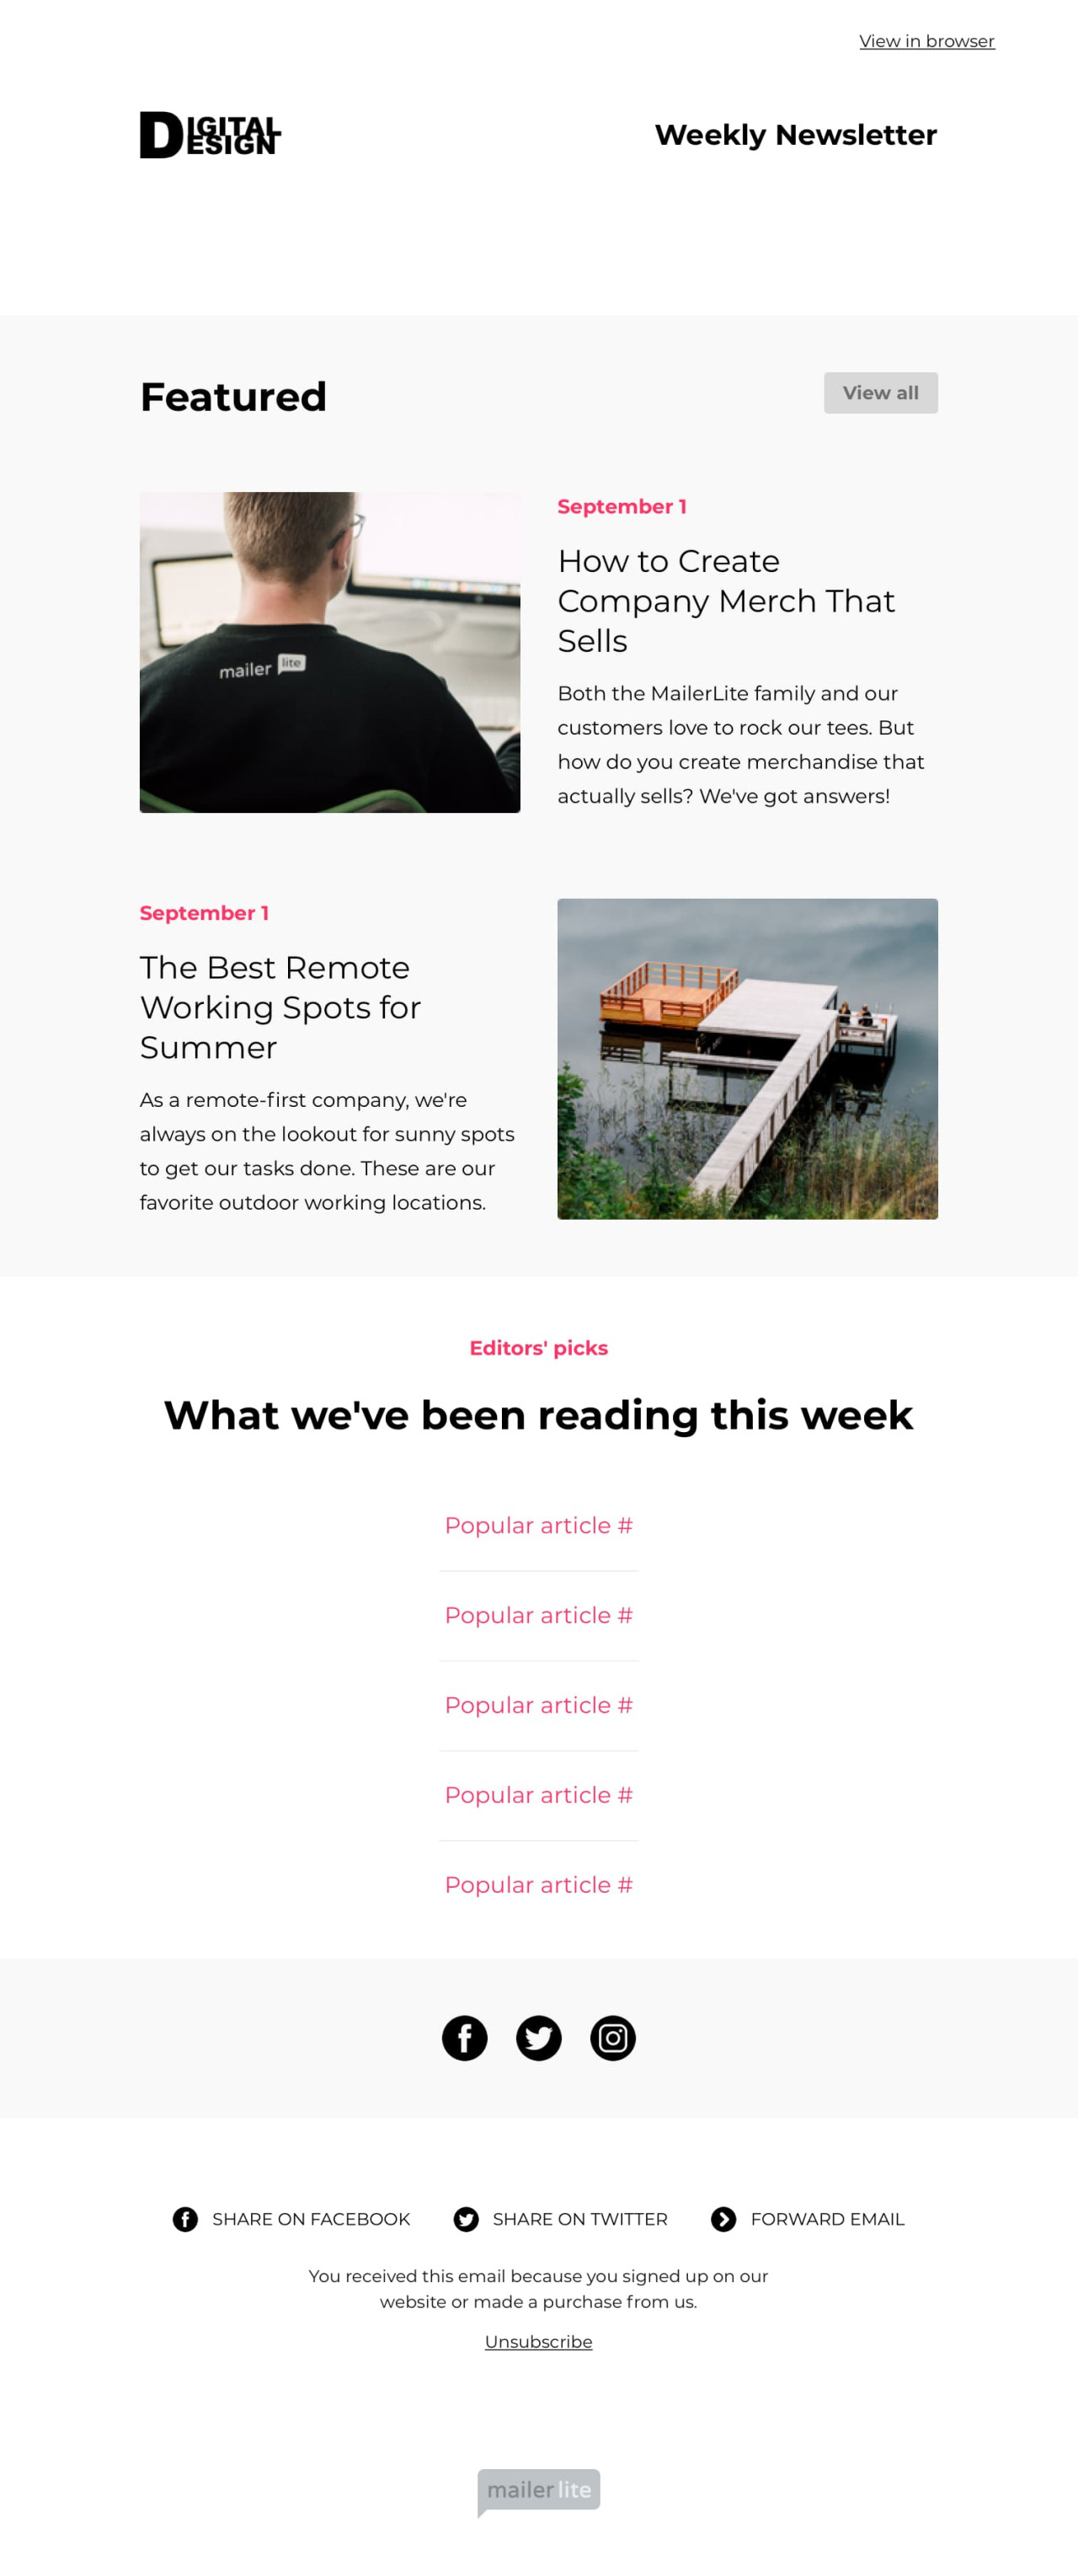 Weekly news email template - Made by MailerLite